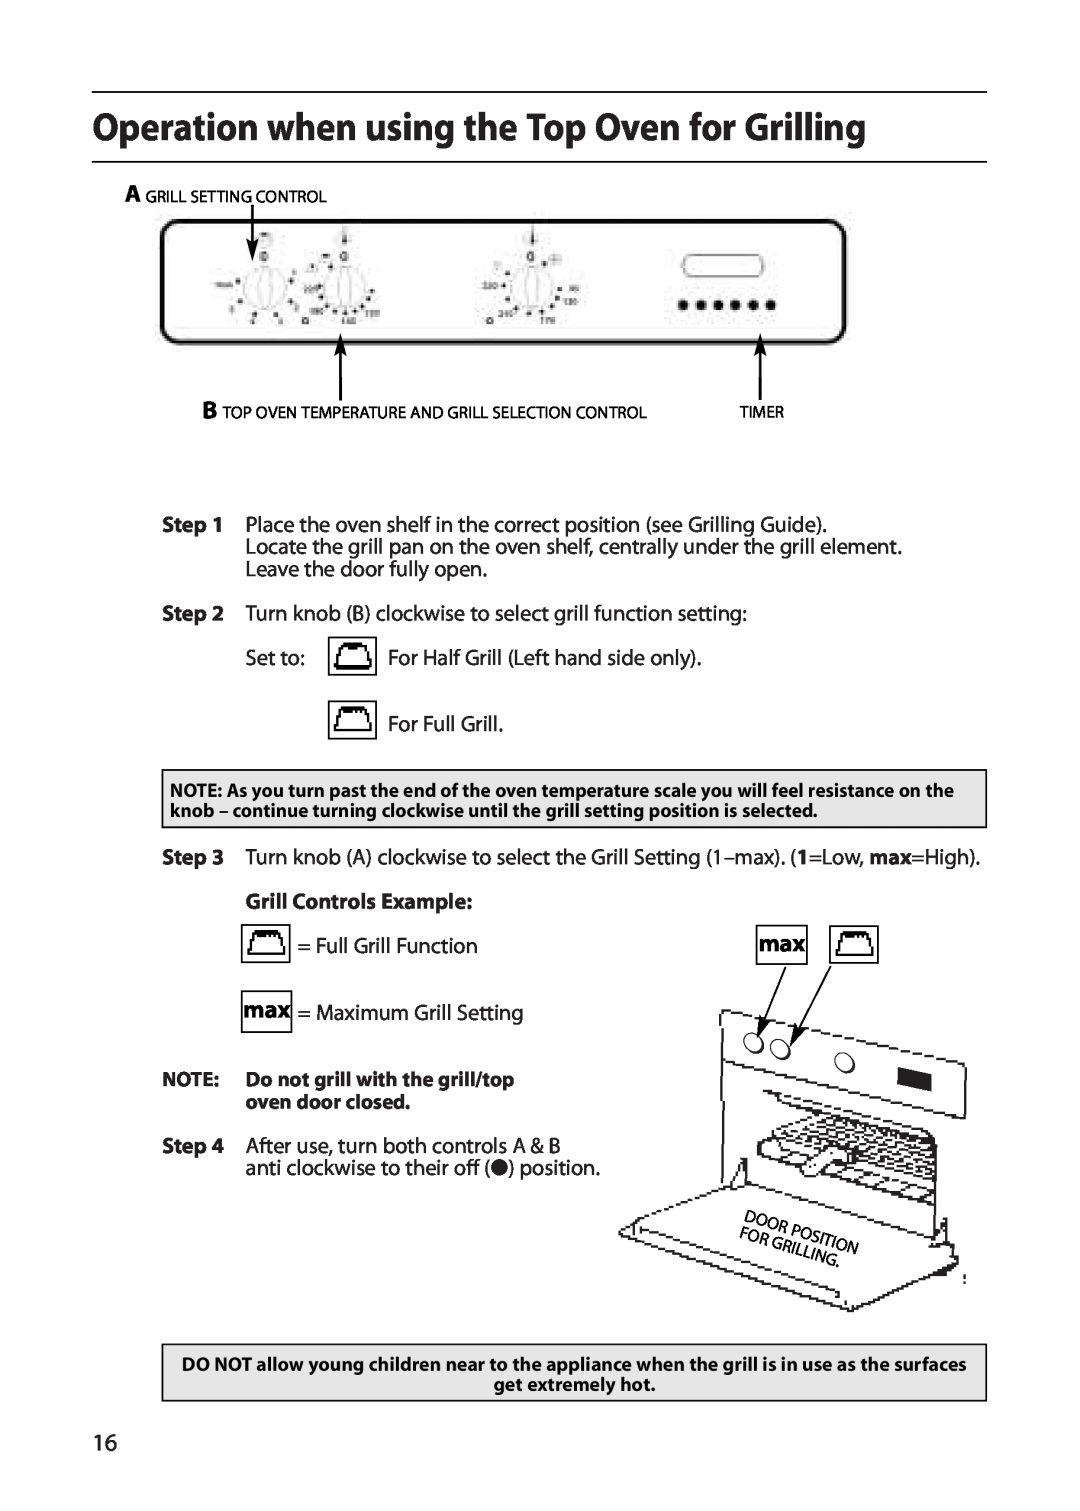 Indesit FDU20 manual Operation when using the Top Oven for Grilling, Grill Controls Example 